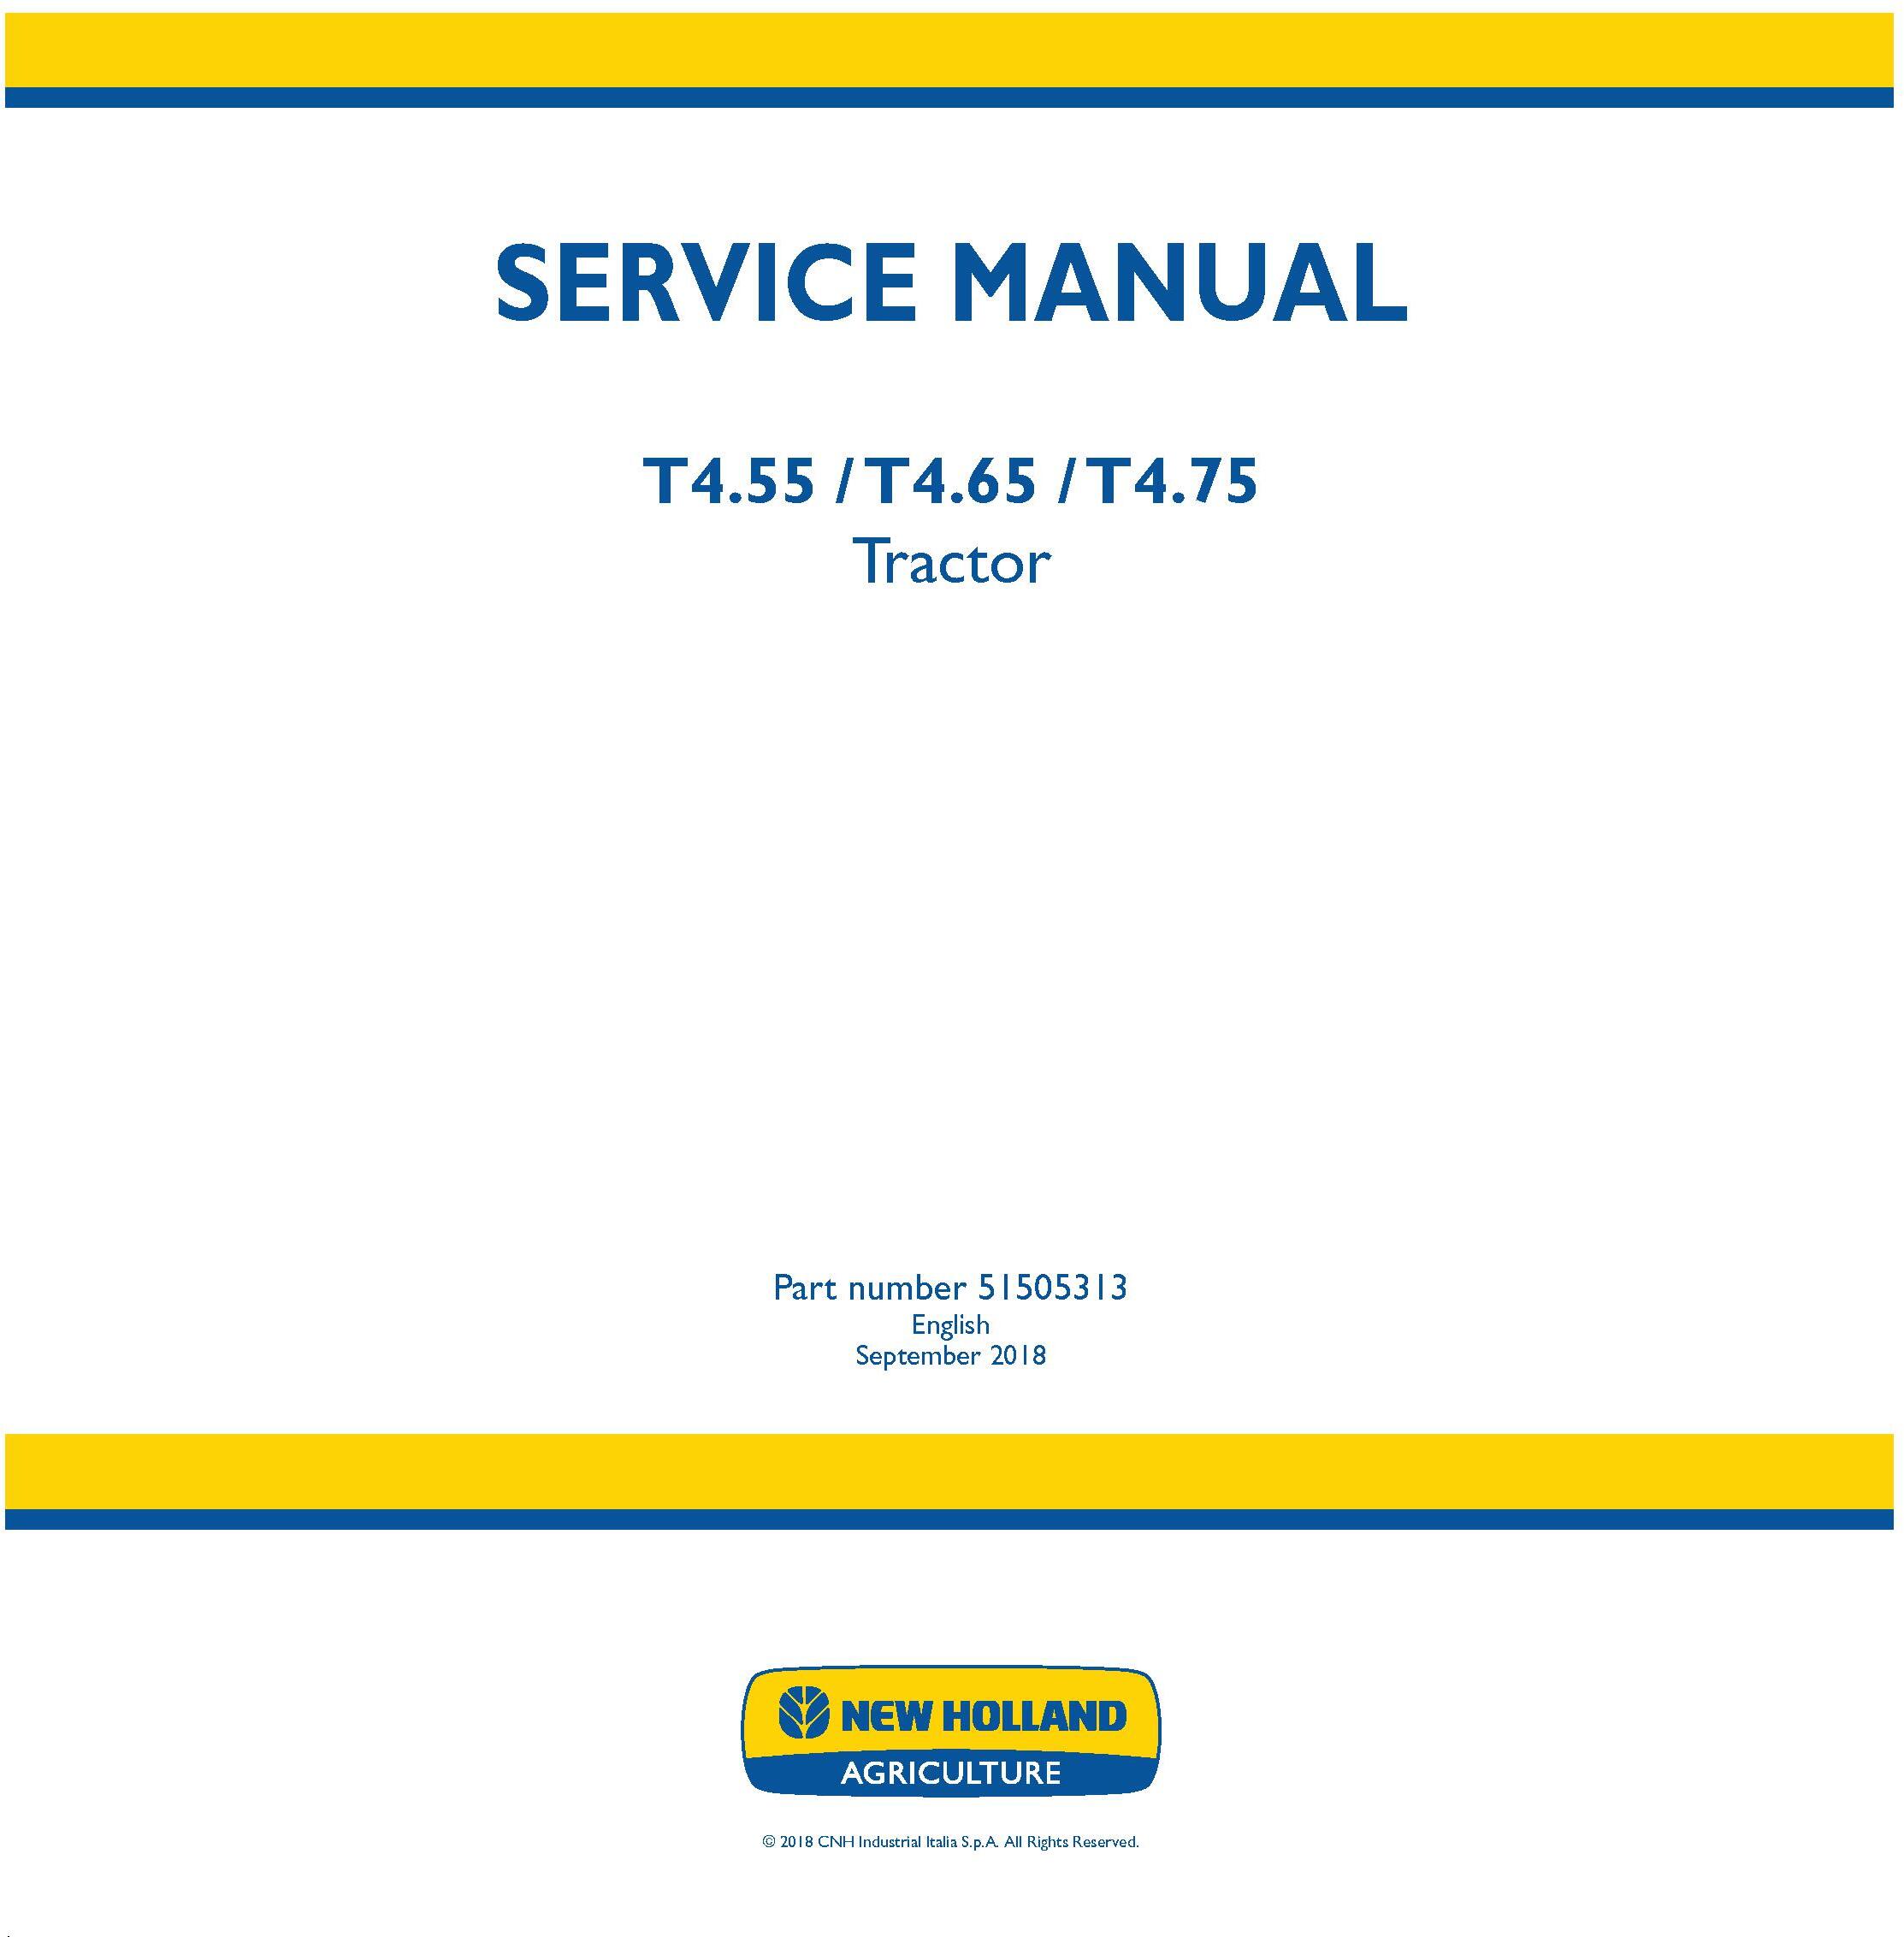 New Holland T4.55, T4.65, T4.75 Tier 4B final Stage IV Tractor Service Manual - 19518